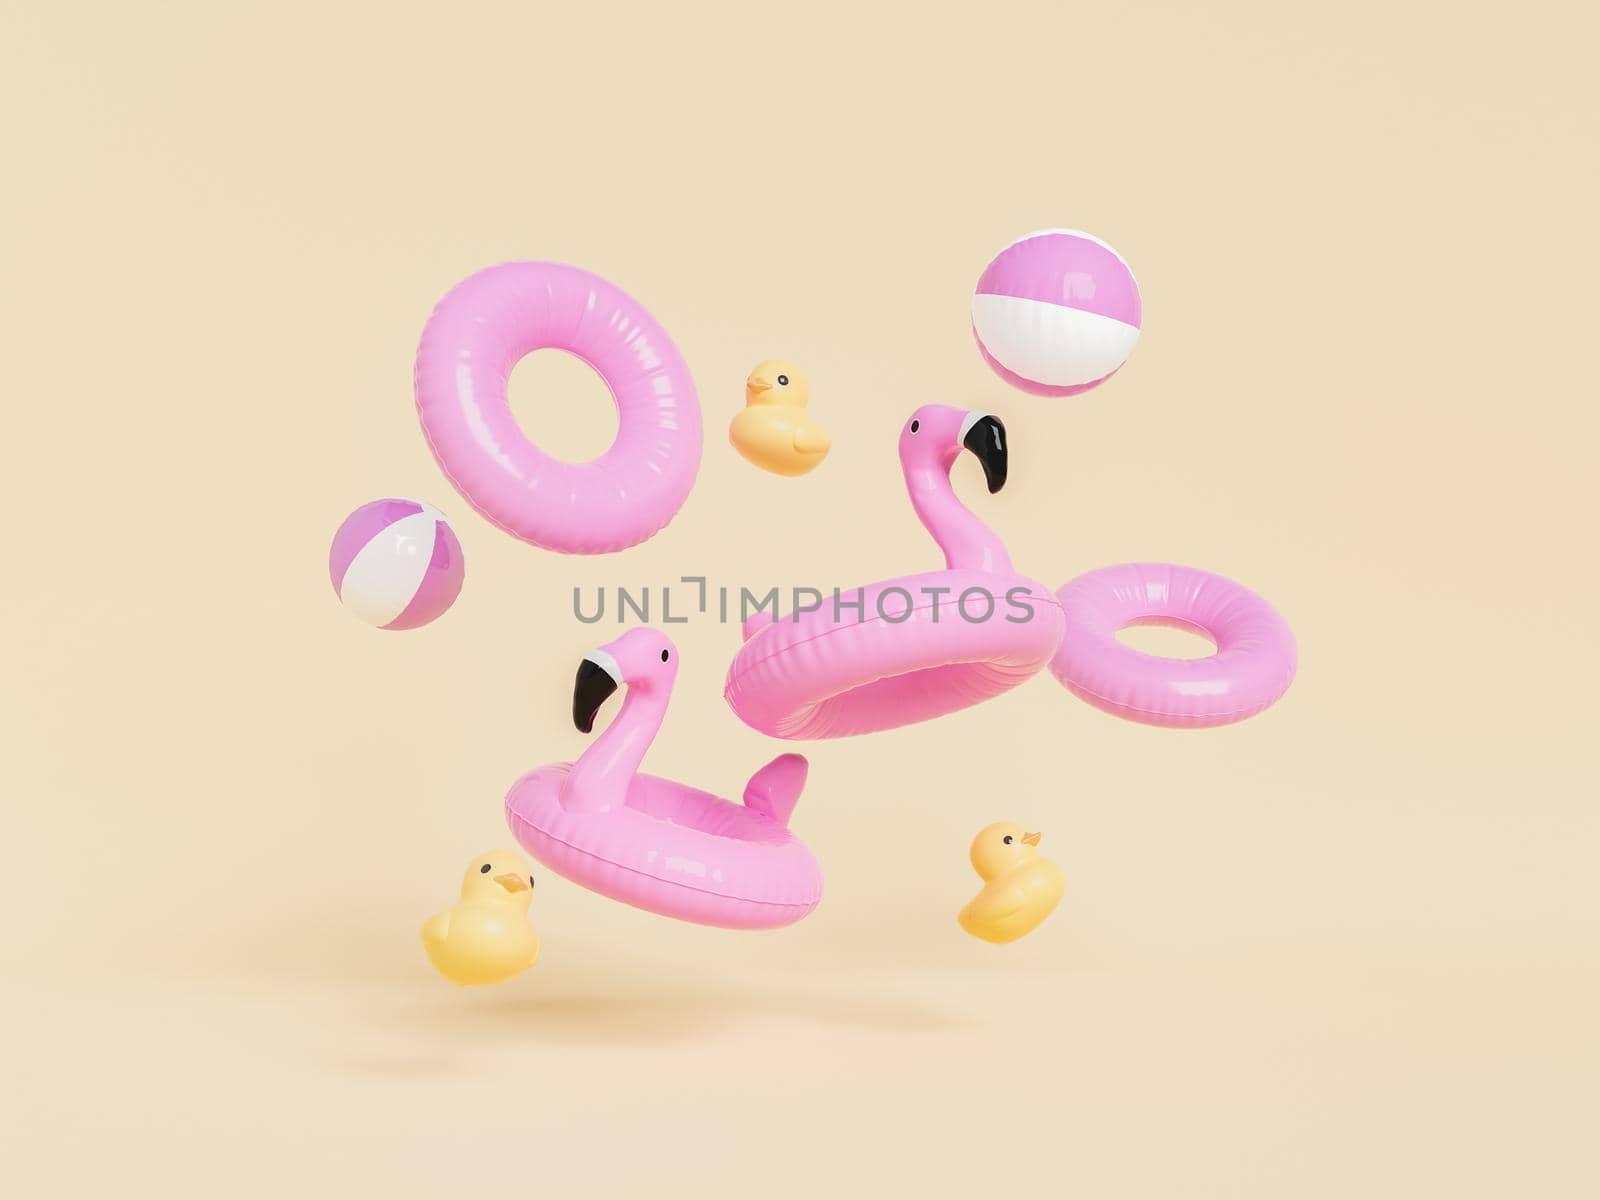 3D rendering of pink inflatable flamingos balls and swim rings with yellow rubber ducks against beige background